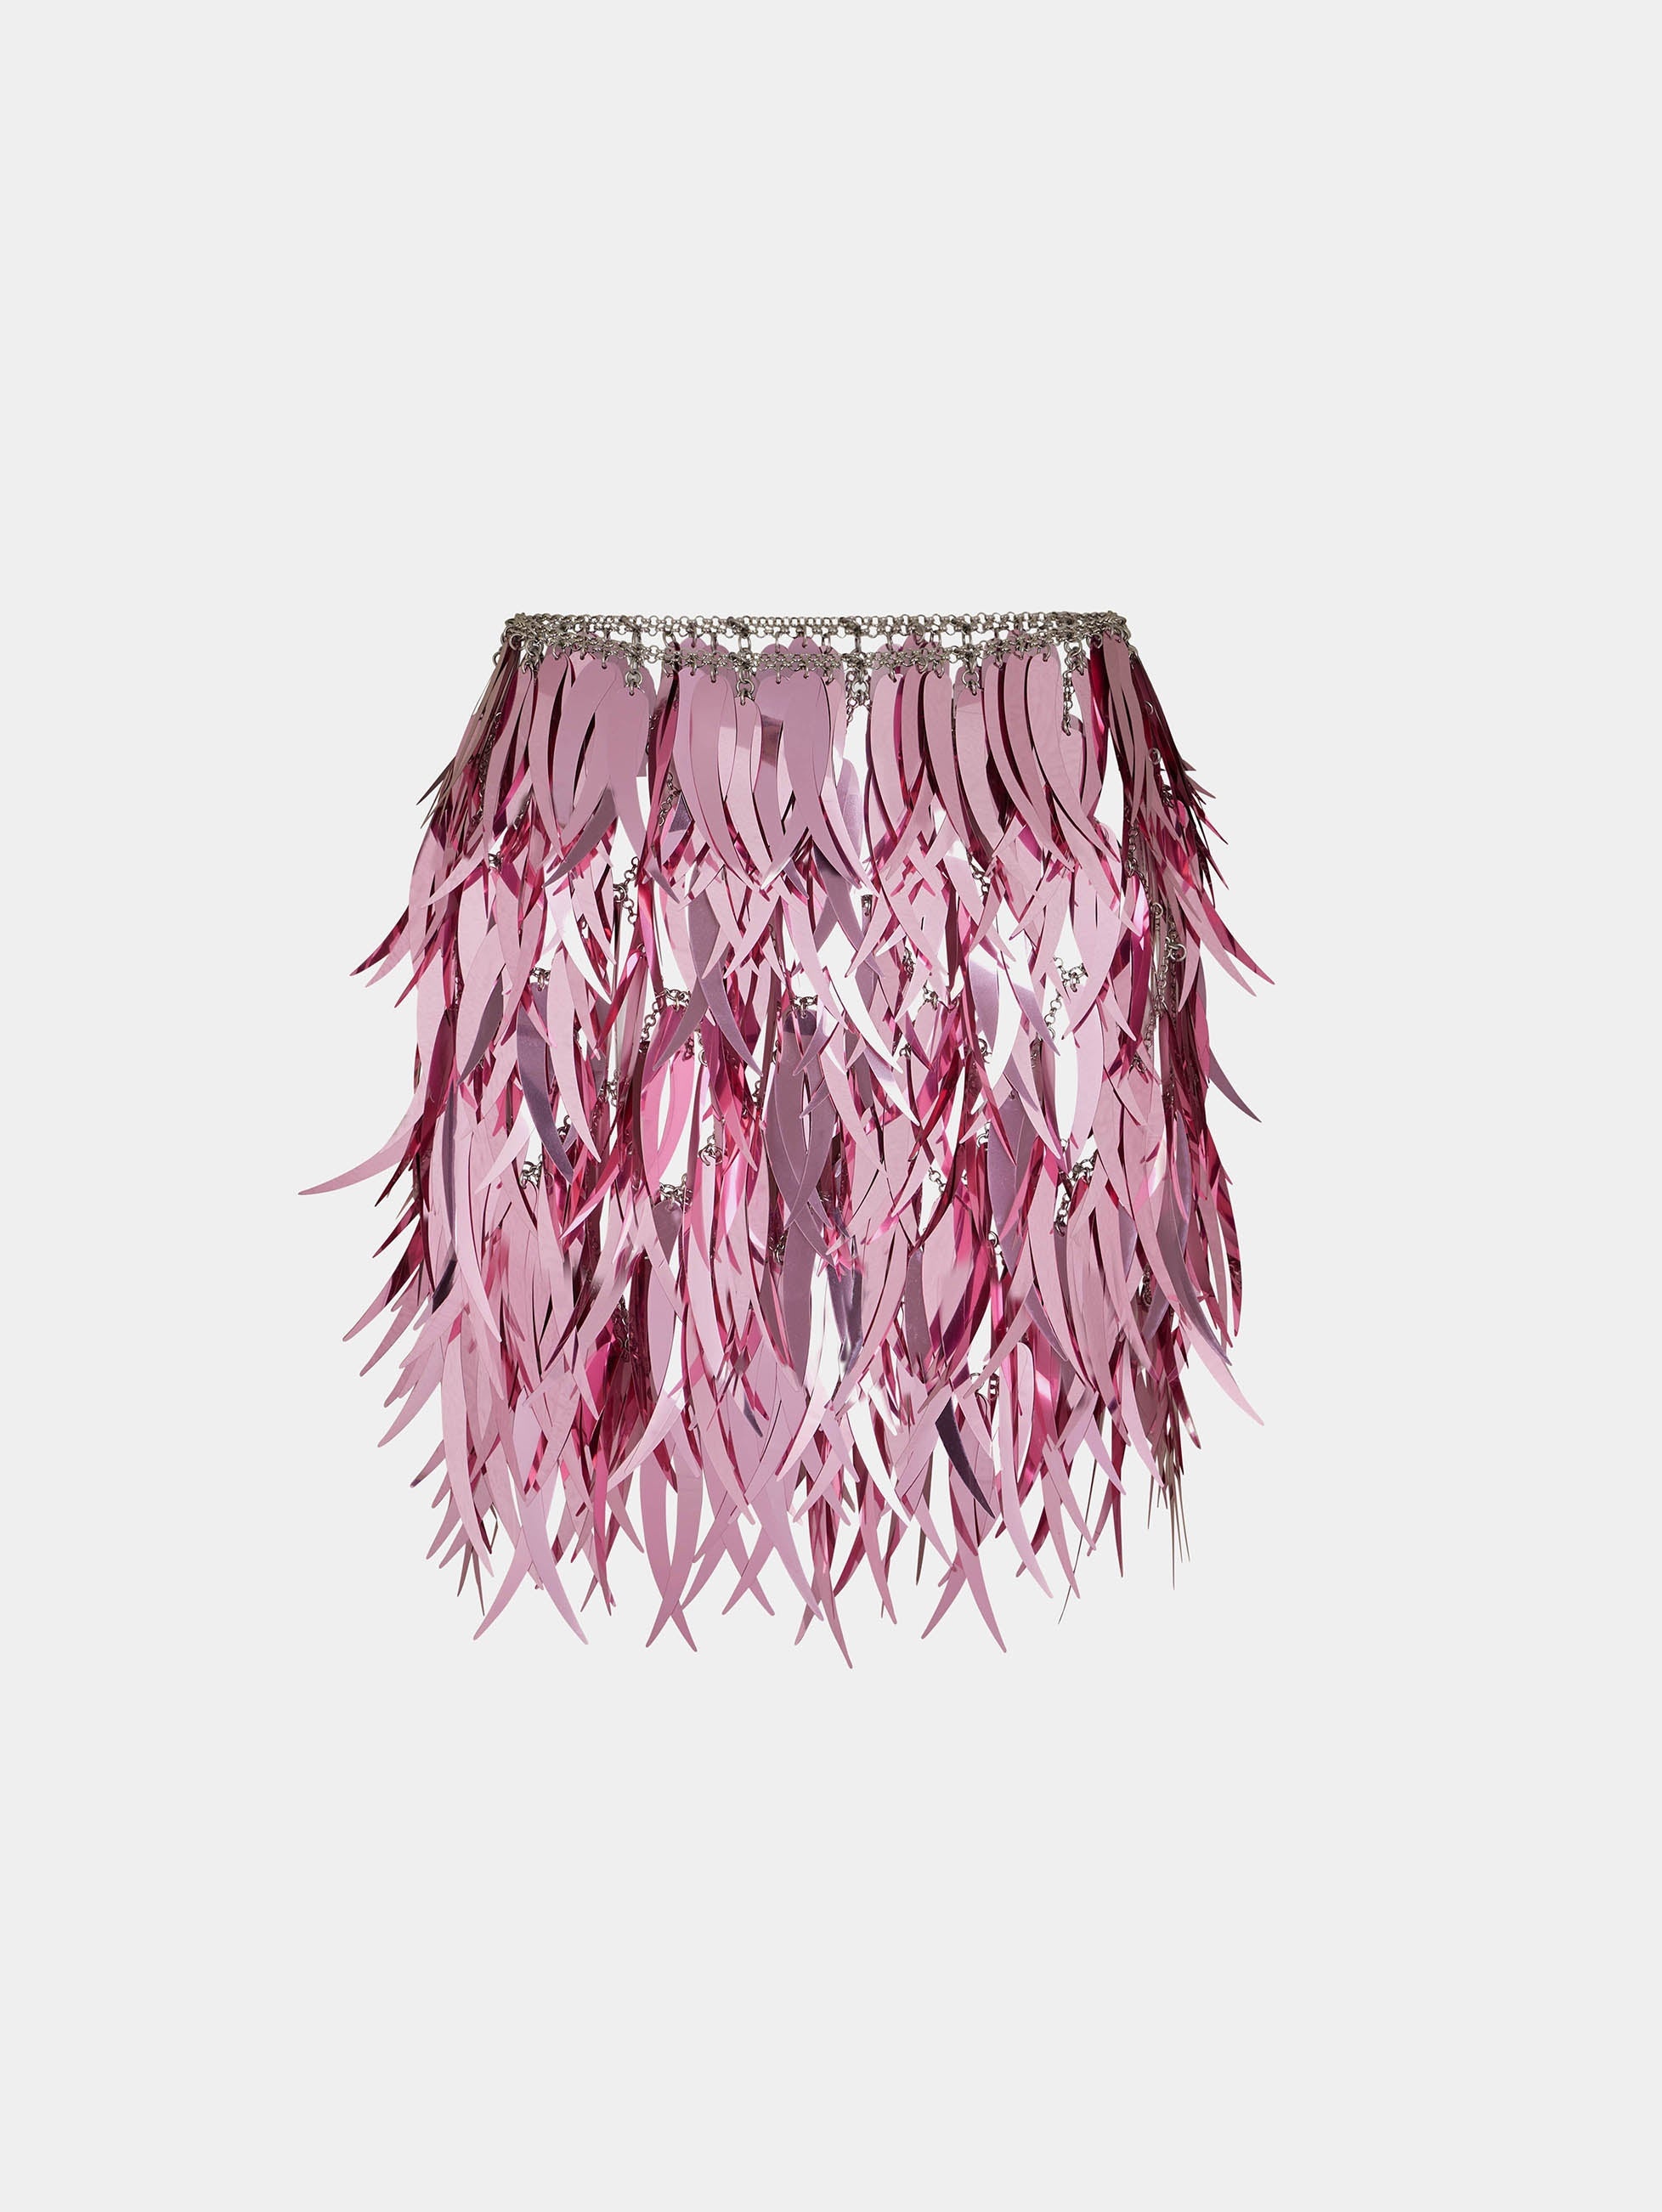 PINK SKIRT WITH A METALLIC FEATHERS ASSEMBLAGE - 2